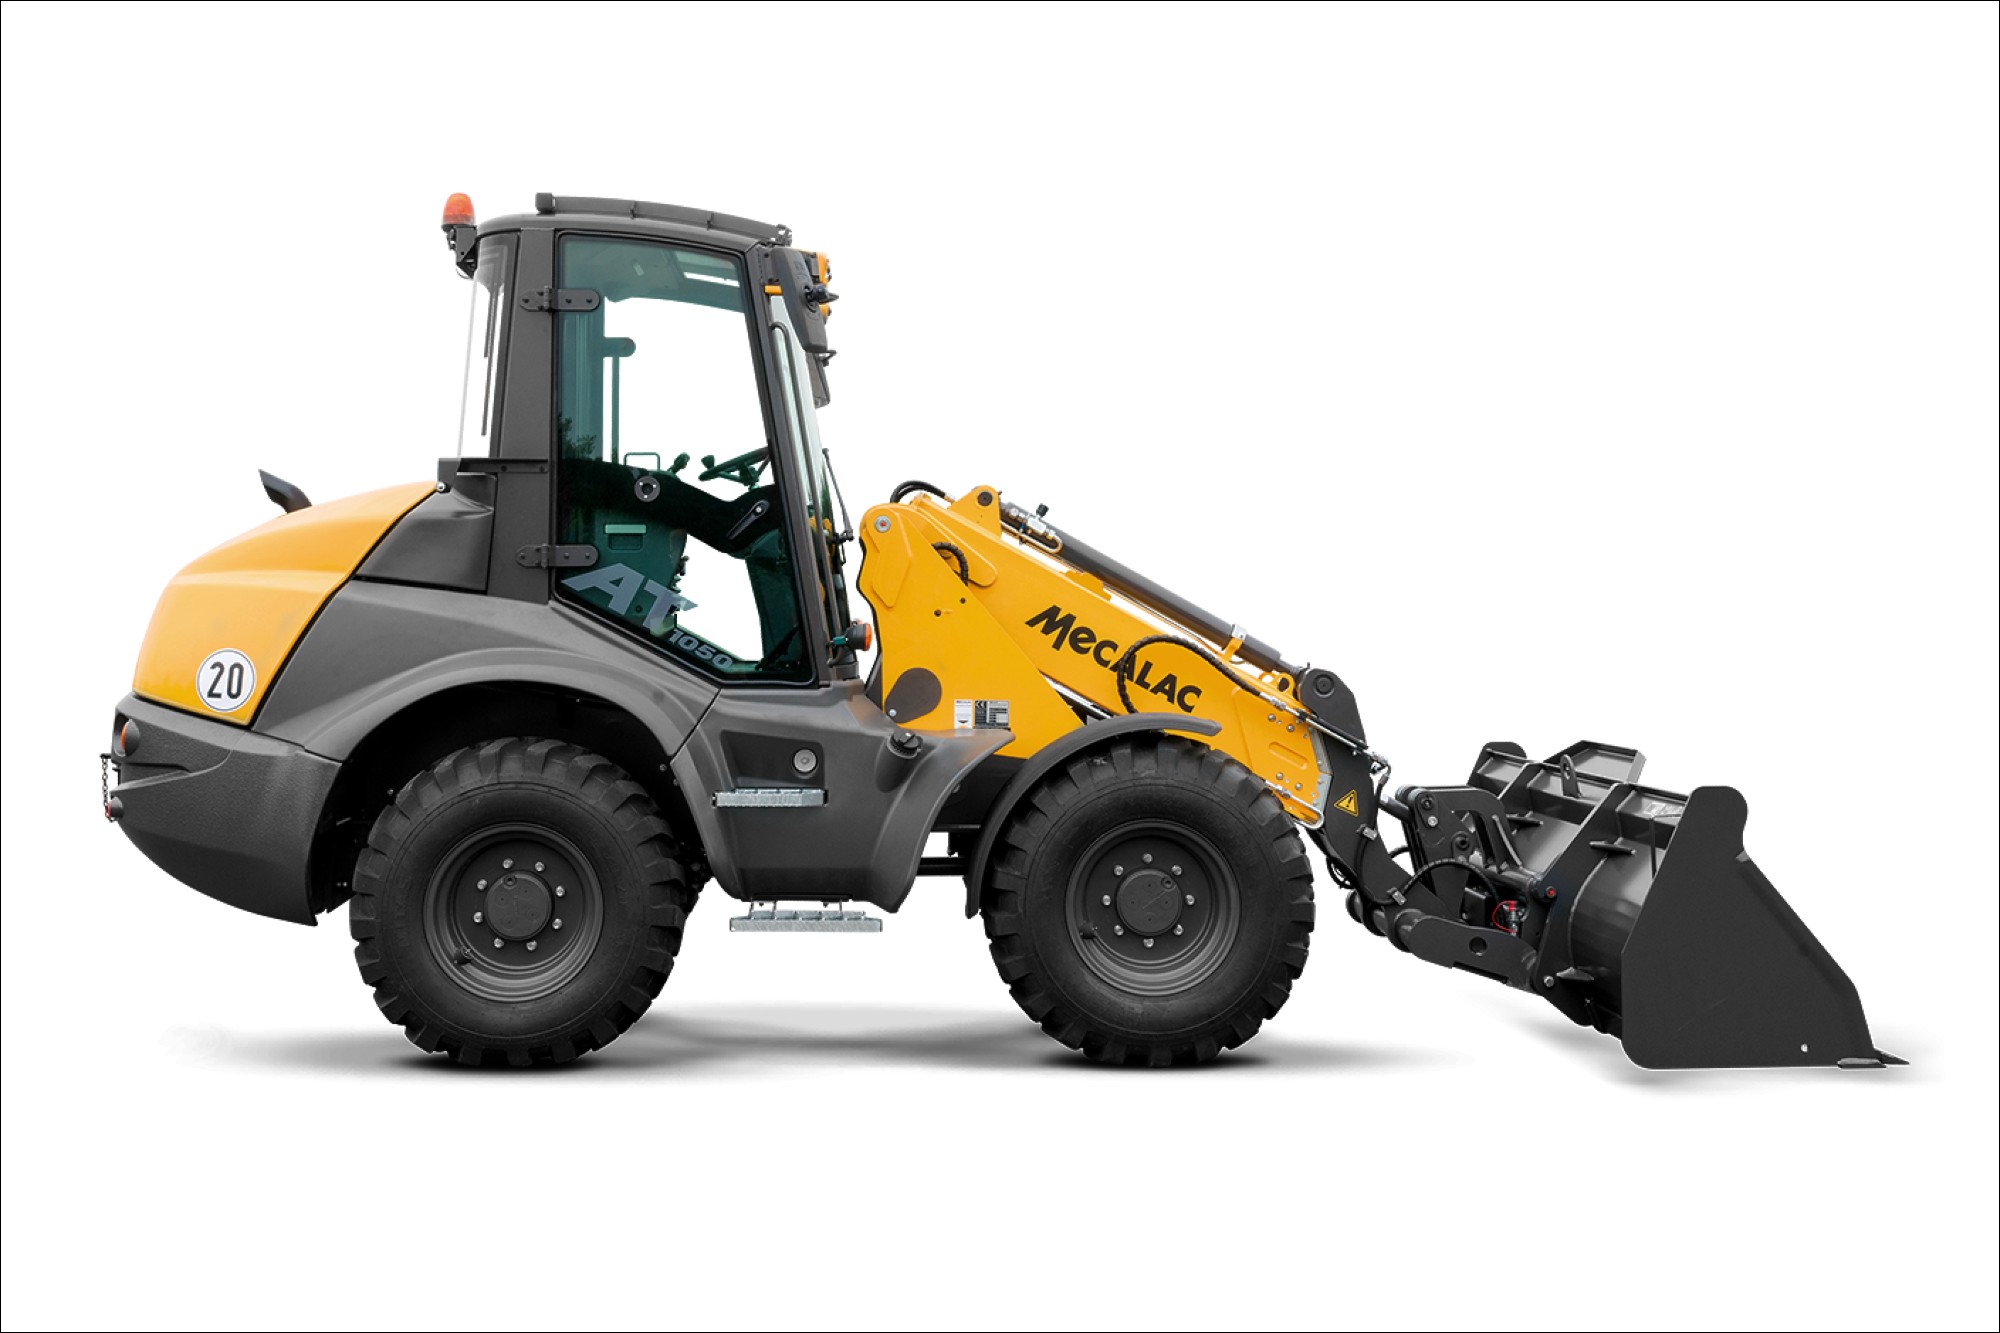 Mecalac, a renowned manufacturer of construction equipment, made significant waves at the recent ARA Show by unveiling its AT1050 telescopic wheel loader to the North American market.